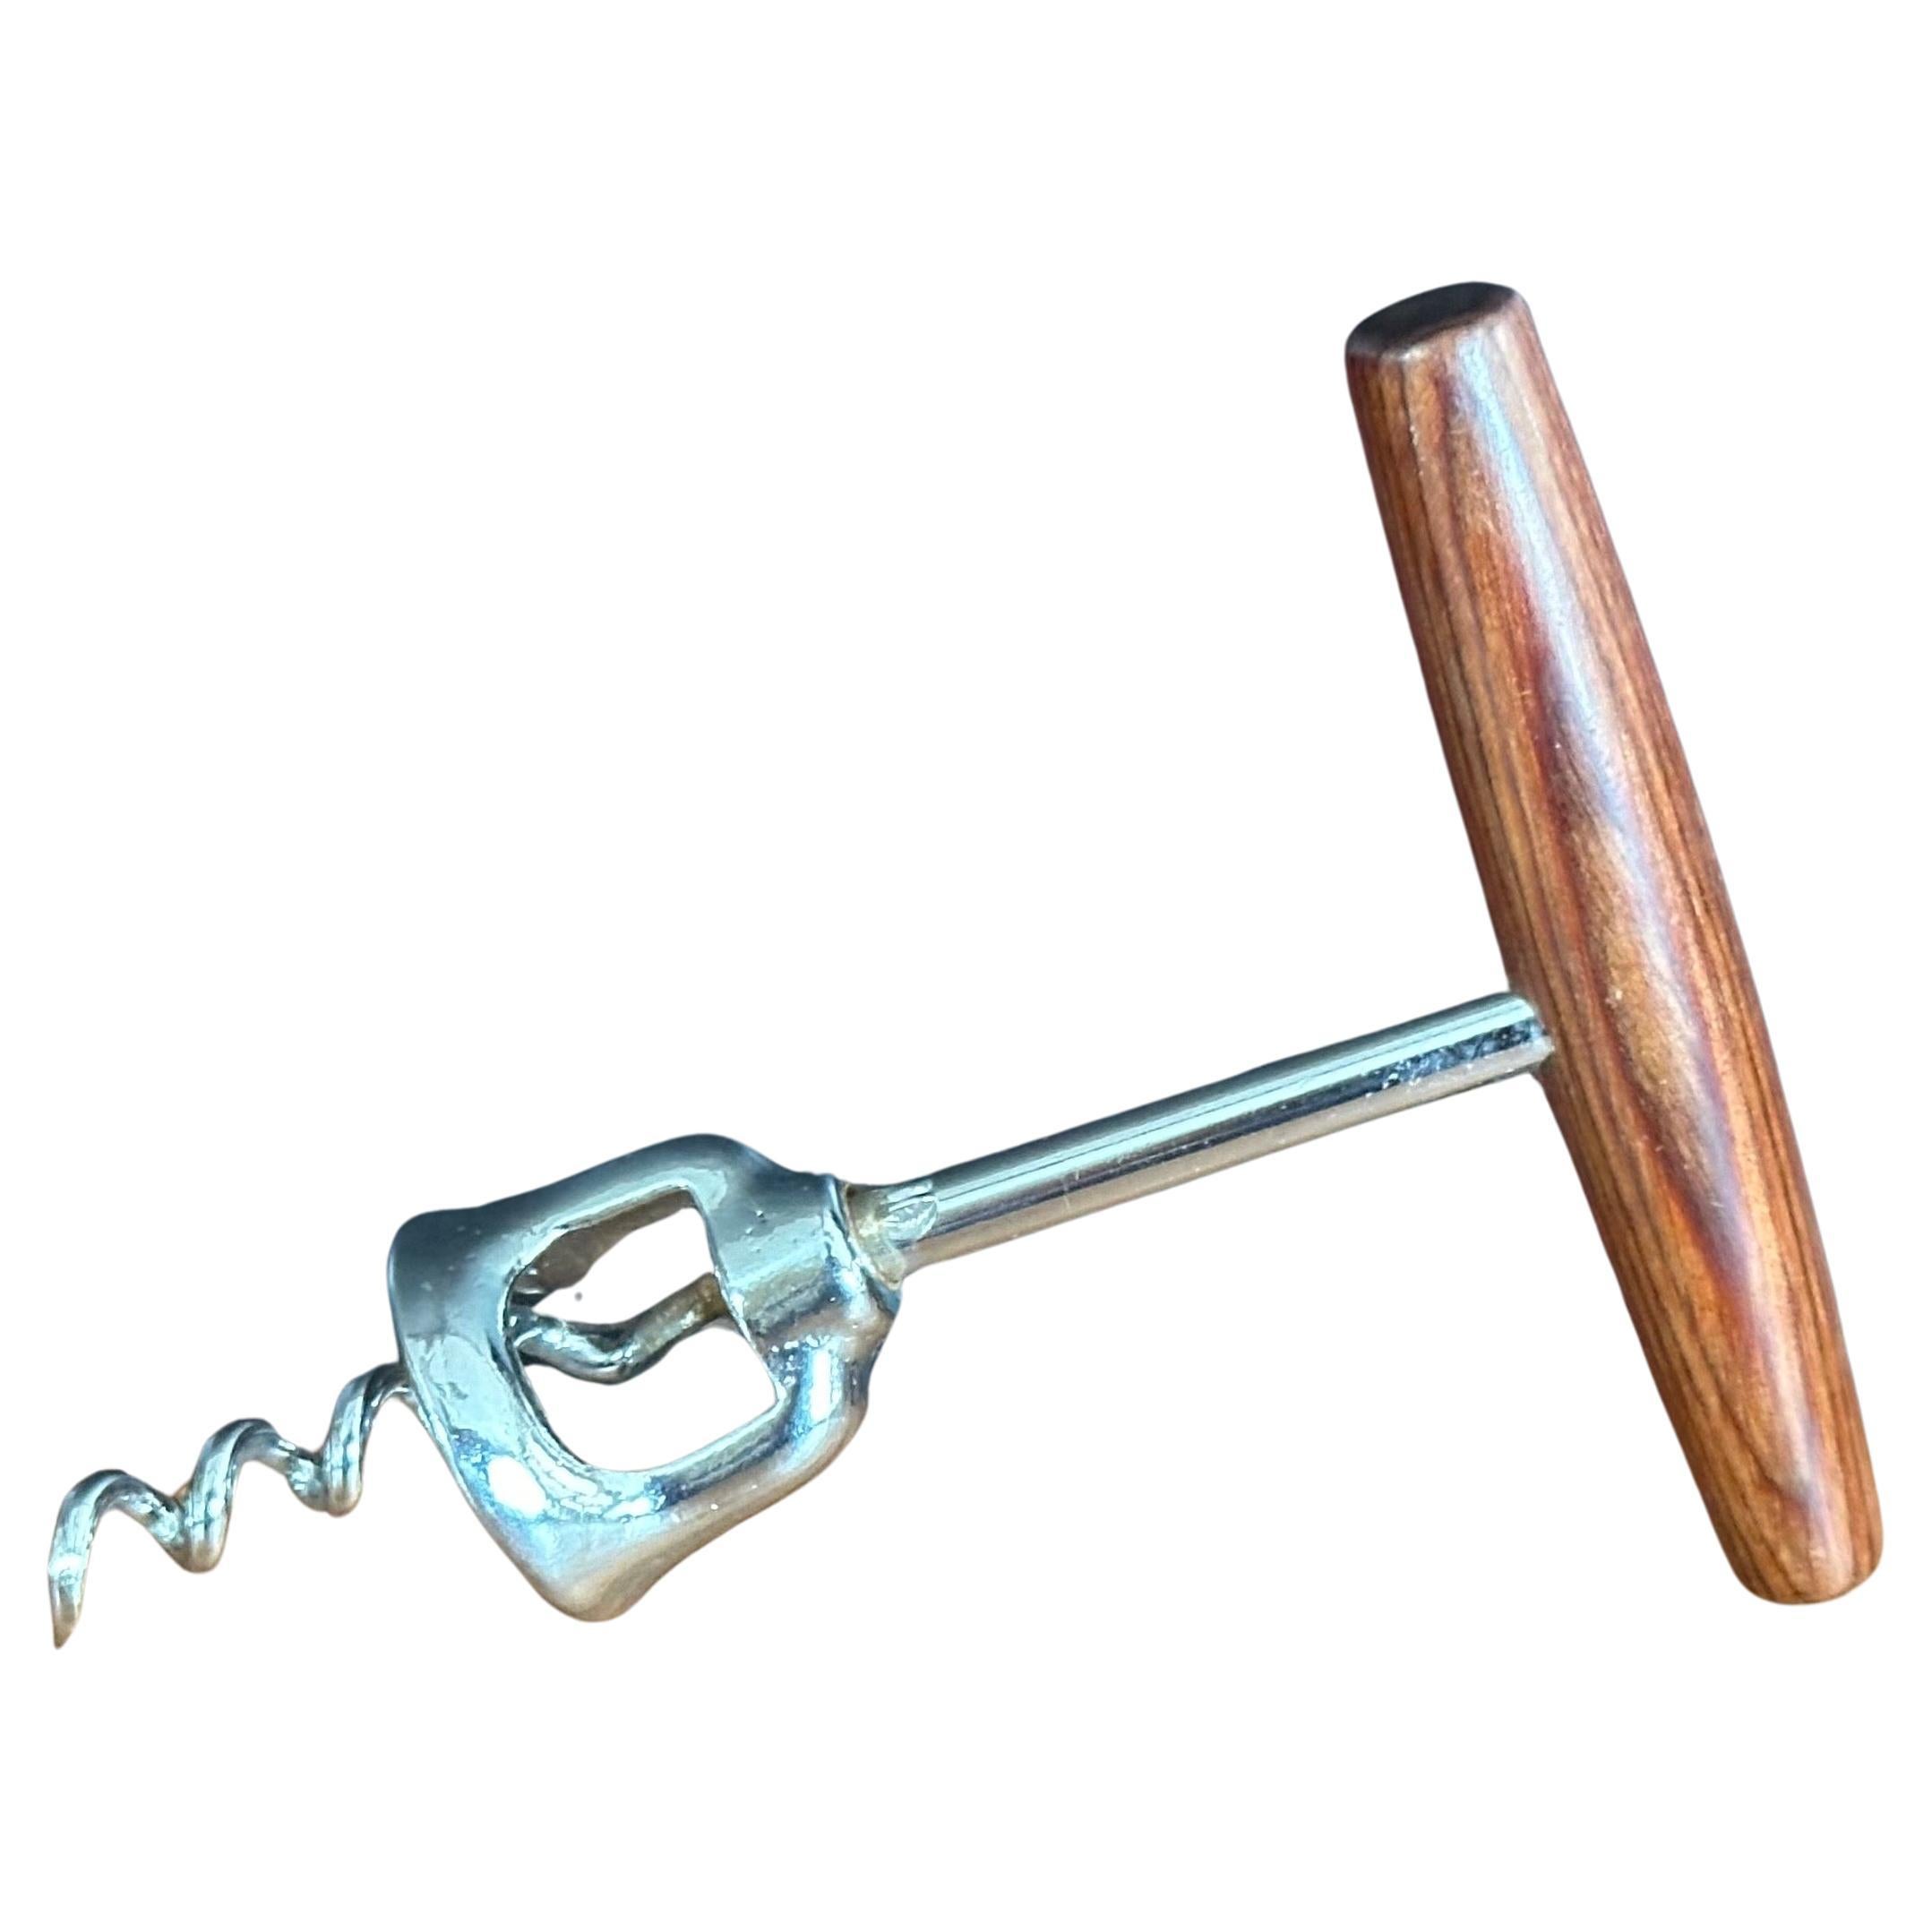 MCM walnut handled wine opener / corkscrew, circa 1970s. The piece is in very good condition and measures 3.75